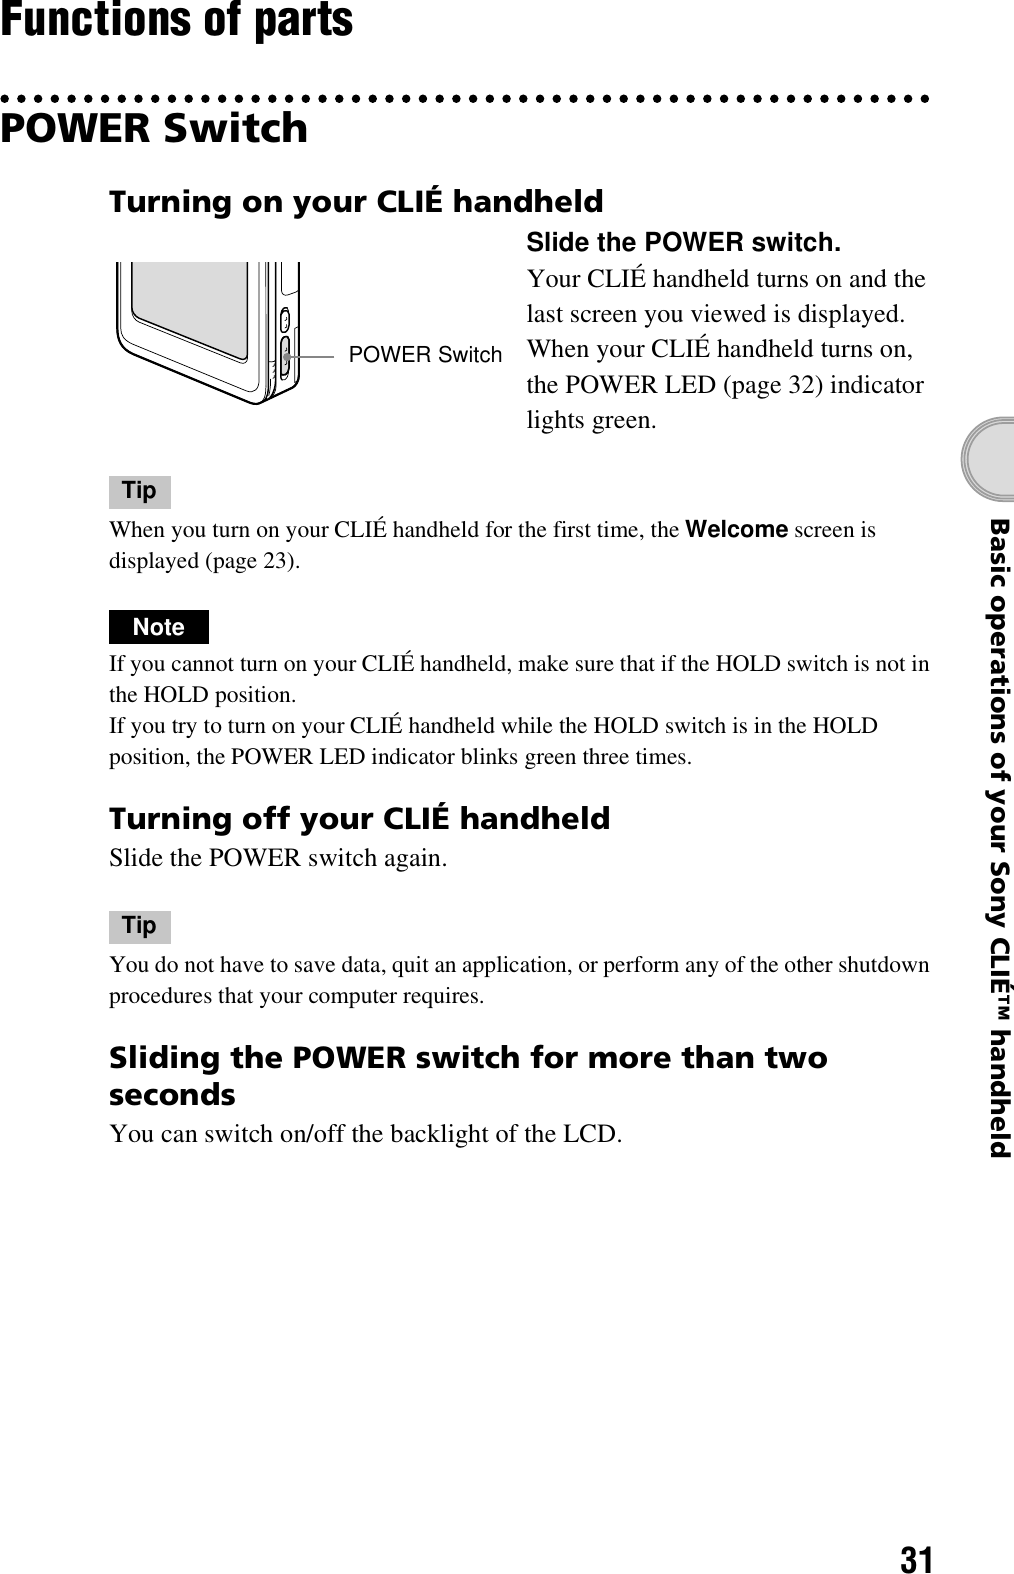 31Basic operations of your Sony CLIÉ™ handheldFunctions of partsPOWER SwitchTipWhen you turn on your CLIÉ handheld for the first time, the Welcome screen is displayed (page 23).NoteIf you cannot turn on your CLIÉ handheld, make sure that if the HOLD switch is not in the HOLD position.If you try to turn on your CLIÉ handheld while the HOLD switch is in the HOLD position, the POWER LED indicator blinks green three times.Turning off your CLIÉ handheldSlide the POWER switch again.TipYou do not have to save data, quit an application, or perform any of the other shutdown procedures that your computer requires.Sliding the POWER switch for more than two secondsYou can switch on/off the backlight of the LCD.Turning on your CLIÉ handheldSlide the POWER switch.Your CLIÉ handheld turns on and the last screen you viewed is displayed. When your CLIÉ handheld turns on, the POWER LED (page 32) indicator lights green.POWER Switch